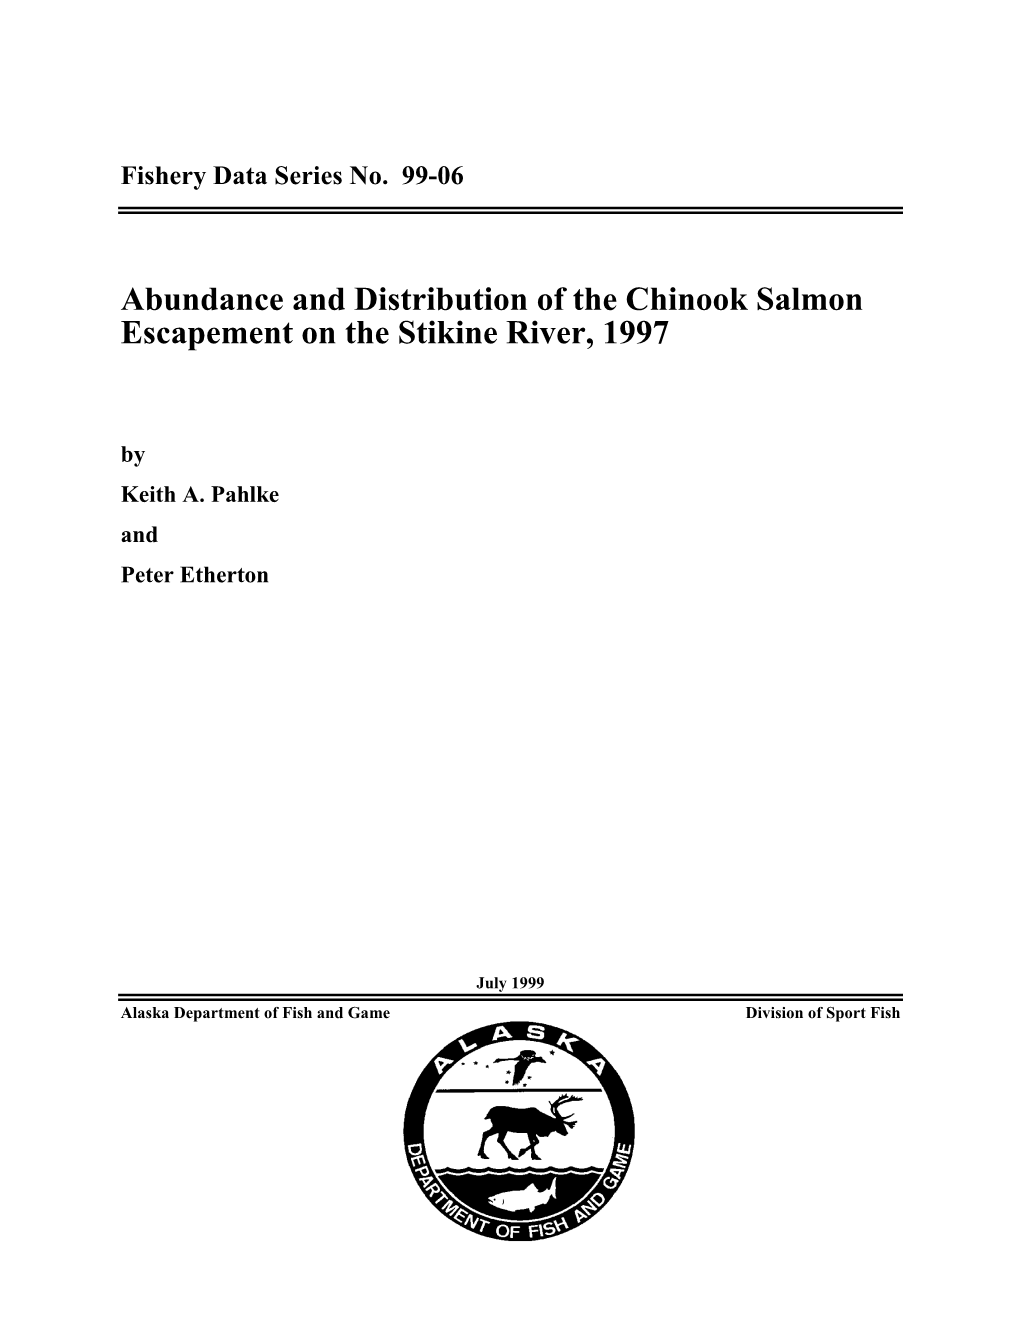 Abundance and Distribution of the Chinook Salmon Escapement on the Stikine River, 1997